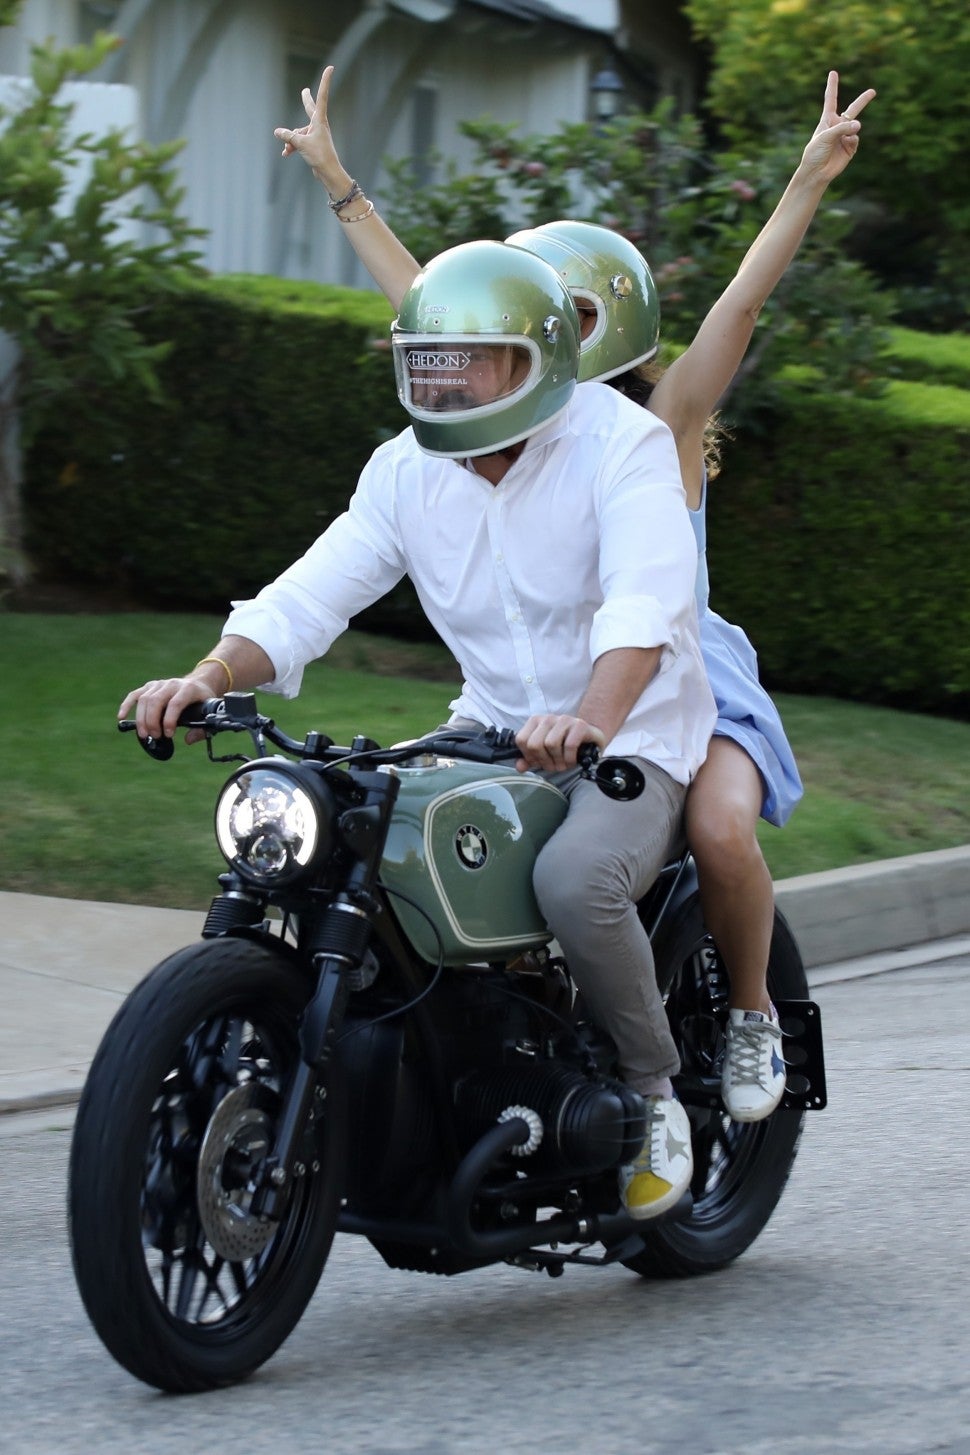 *EXCLUSIVE* -Ben Affleck goes out for a cruise with girlfriend Ana De Armas on his new BMW motorcycle that he presumably got as a birthday gift from her along with matching helmets! The pair were so excited to test drive the new bike that they wore their helmets with the stickers sill on the front. Ben turned 48 yesterday and the actor certainly seemed to have a happy one! *Shot on August 15, 2020*